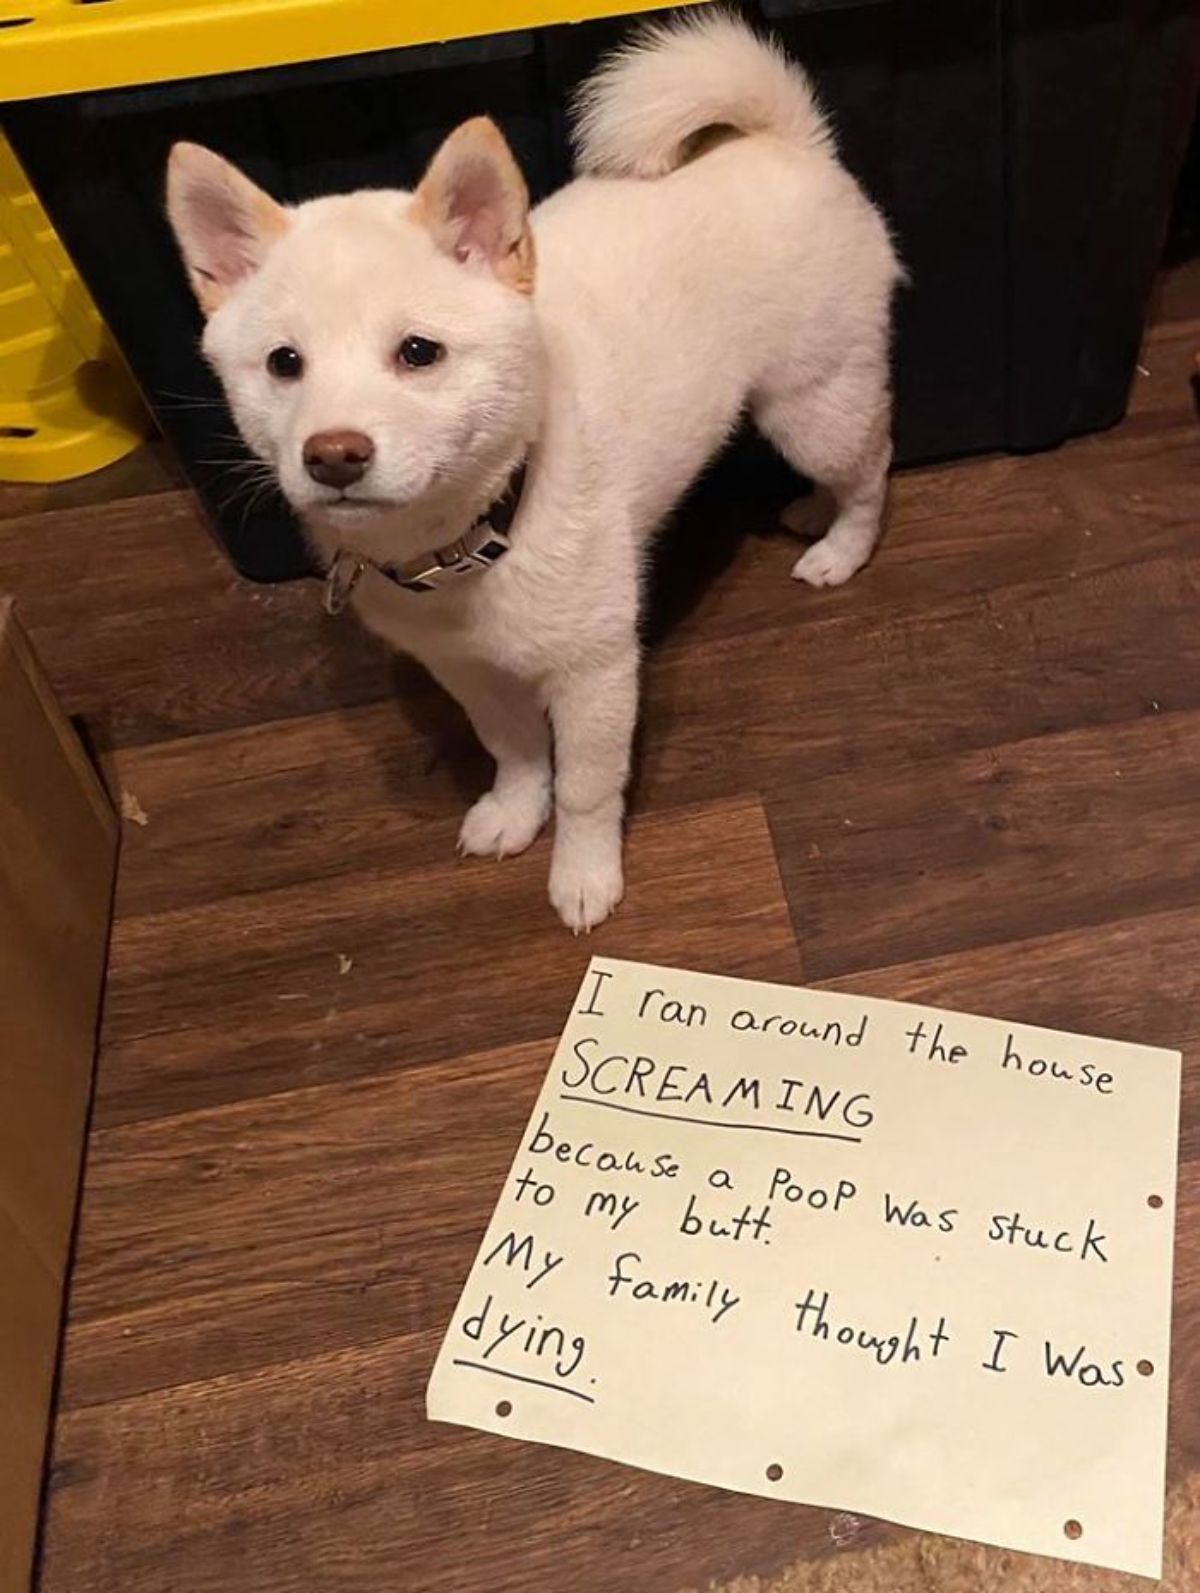 white malamute puppy standing on the floor looking up with a note saying that the puppy had poop stuck on the butt, panicked and ran around screaming and the family thought he was dying